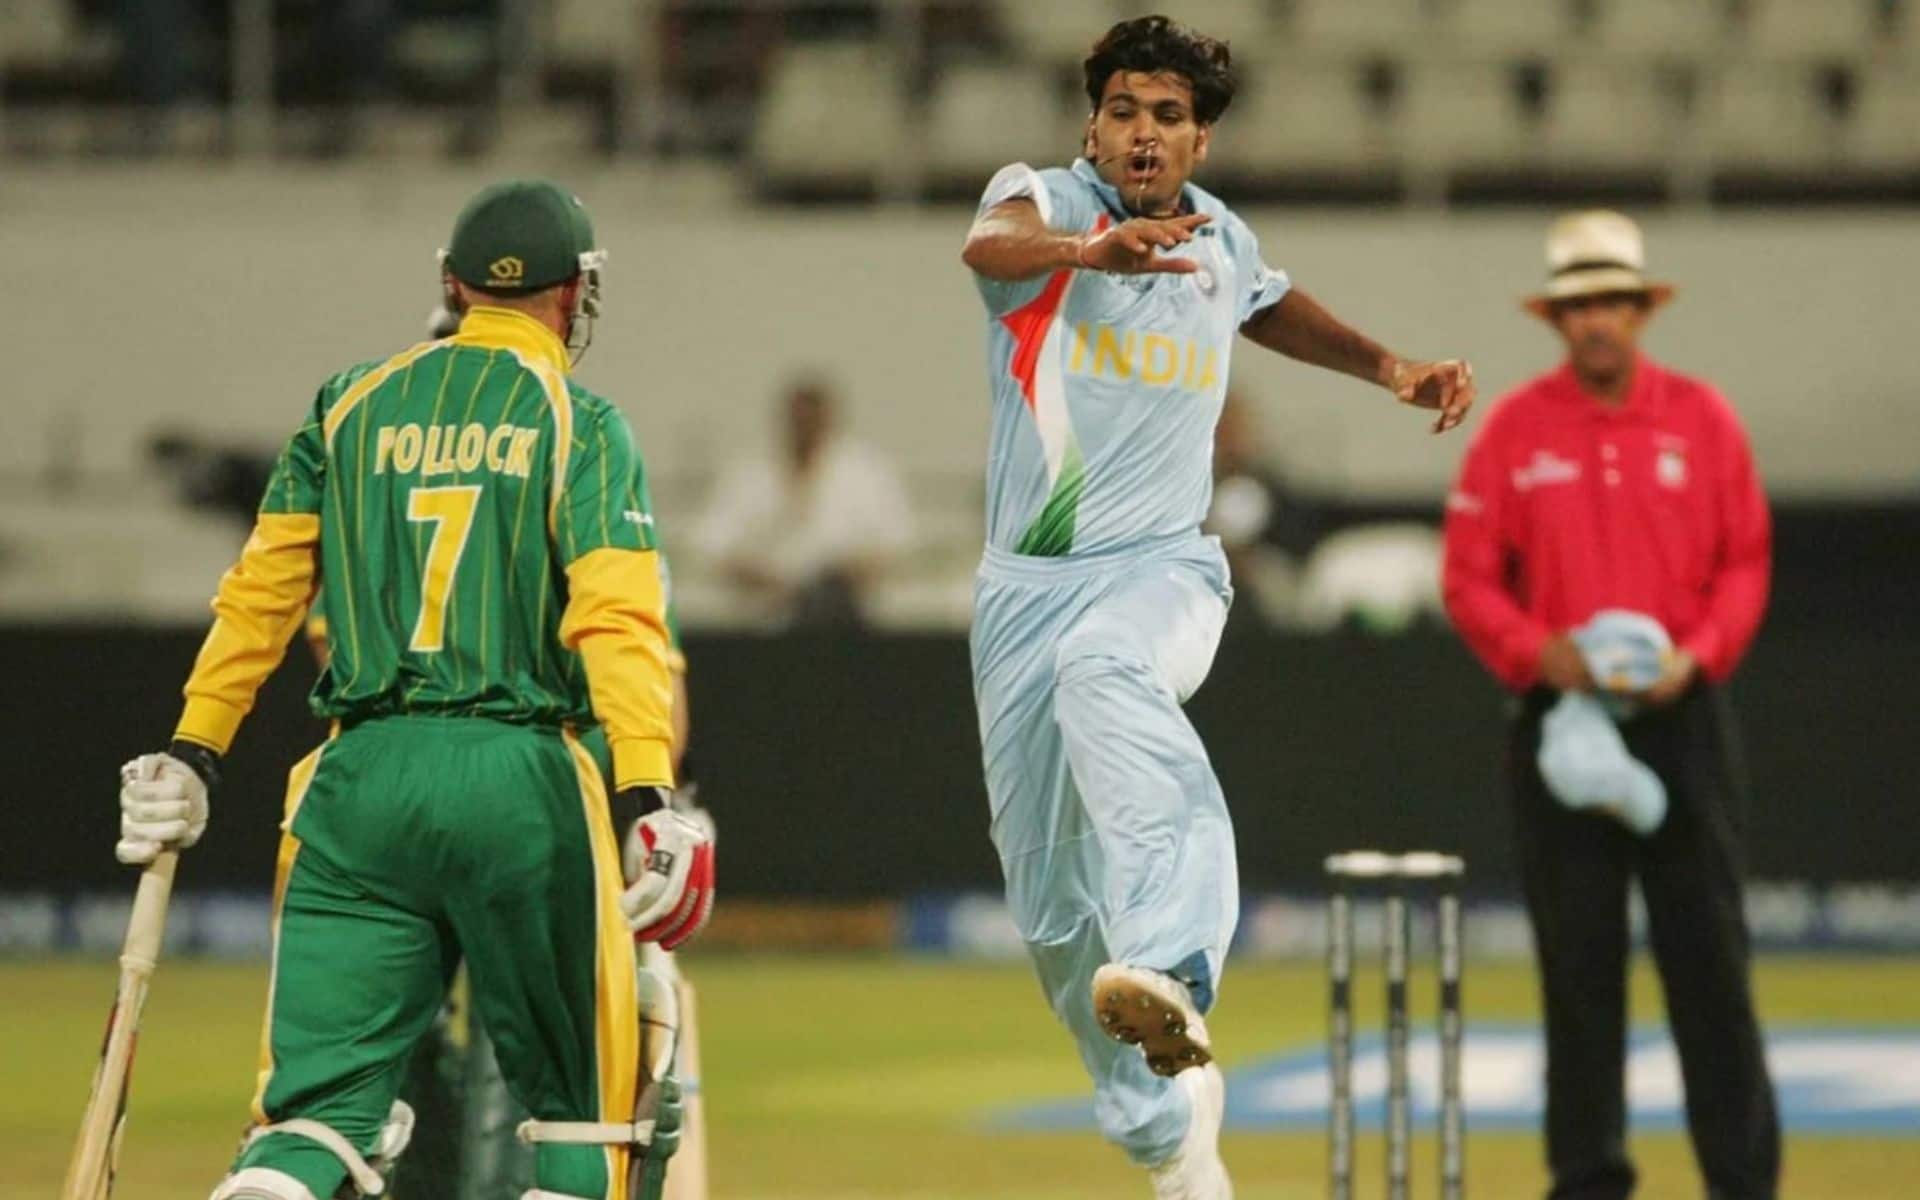 RP Singh leaping in joy after Shaun Pollock's wicket in 2007 T20 World Cup (x.com)